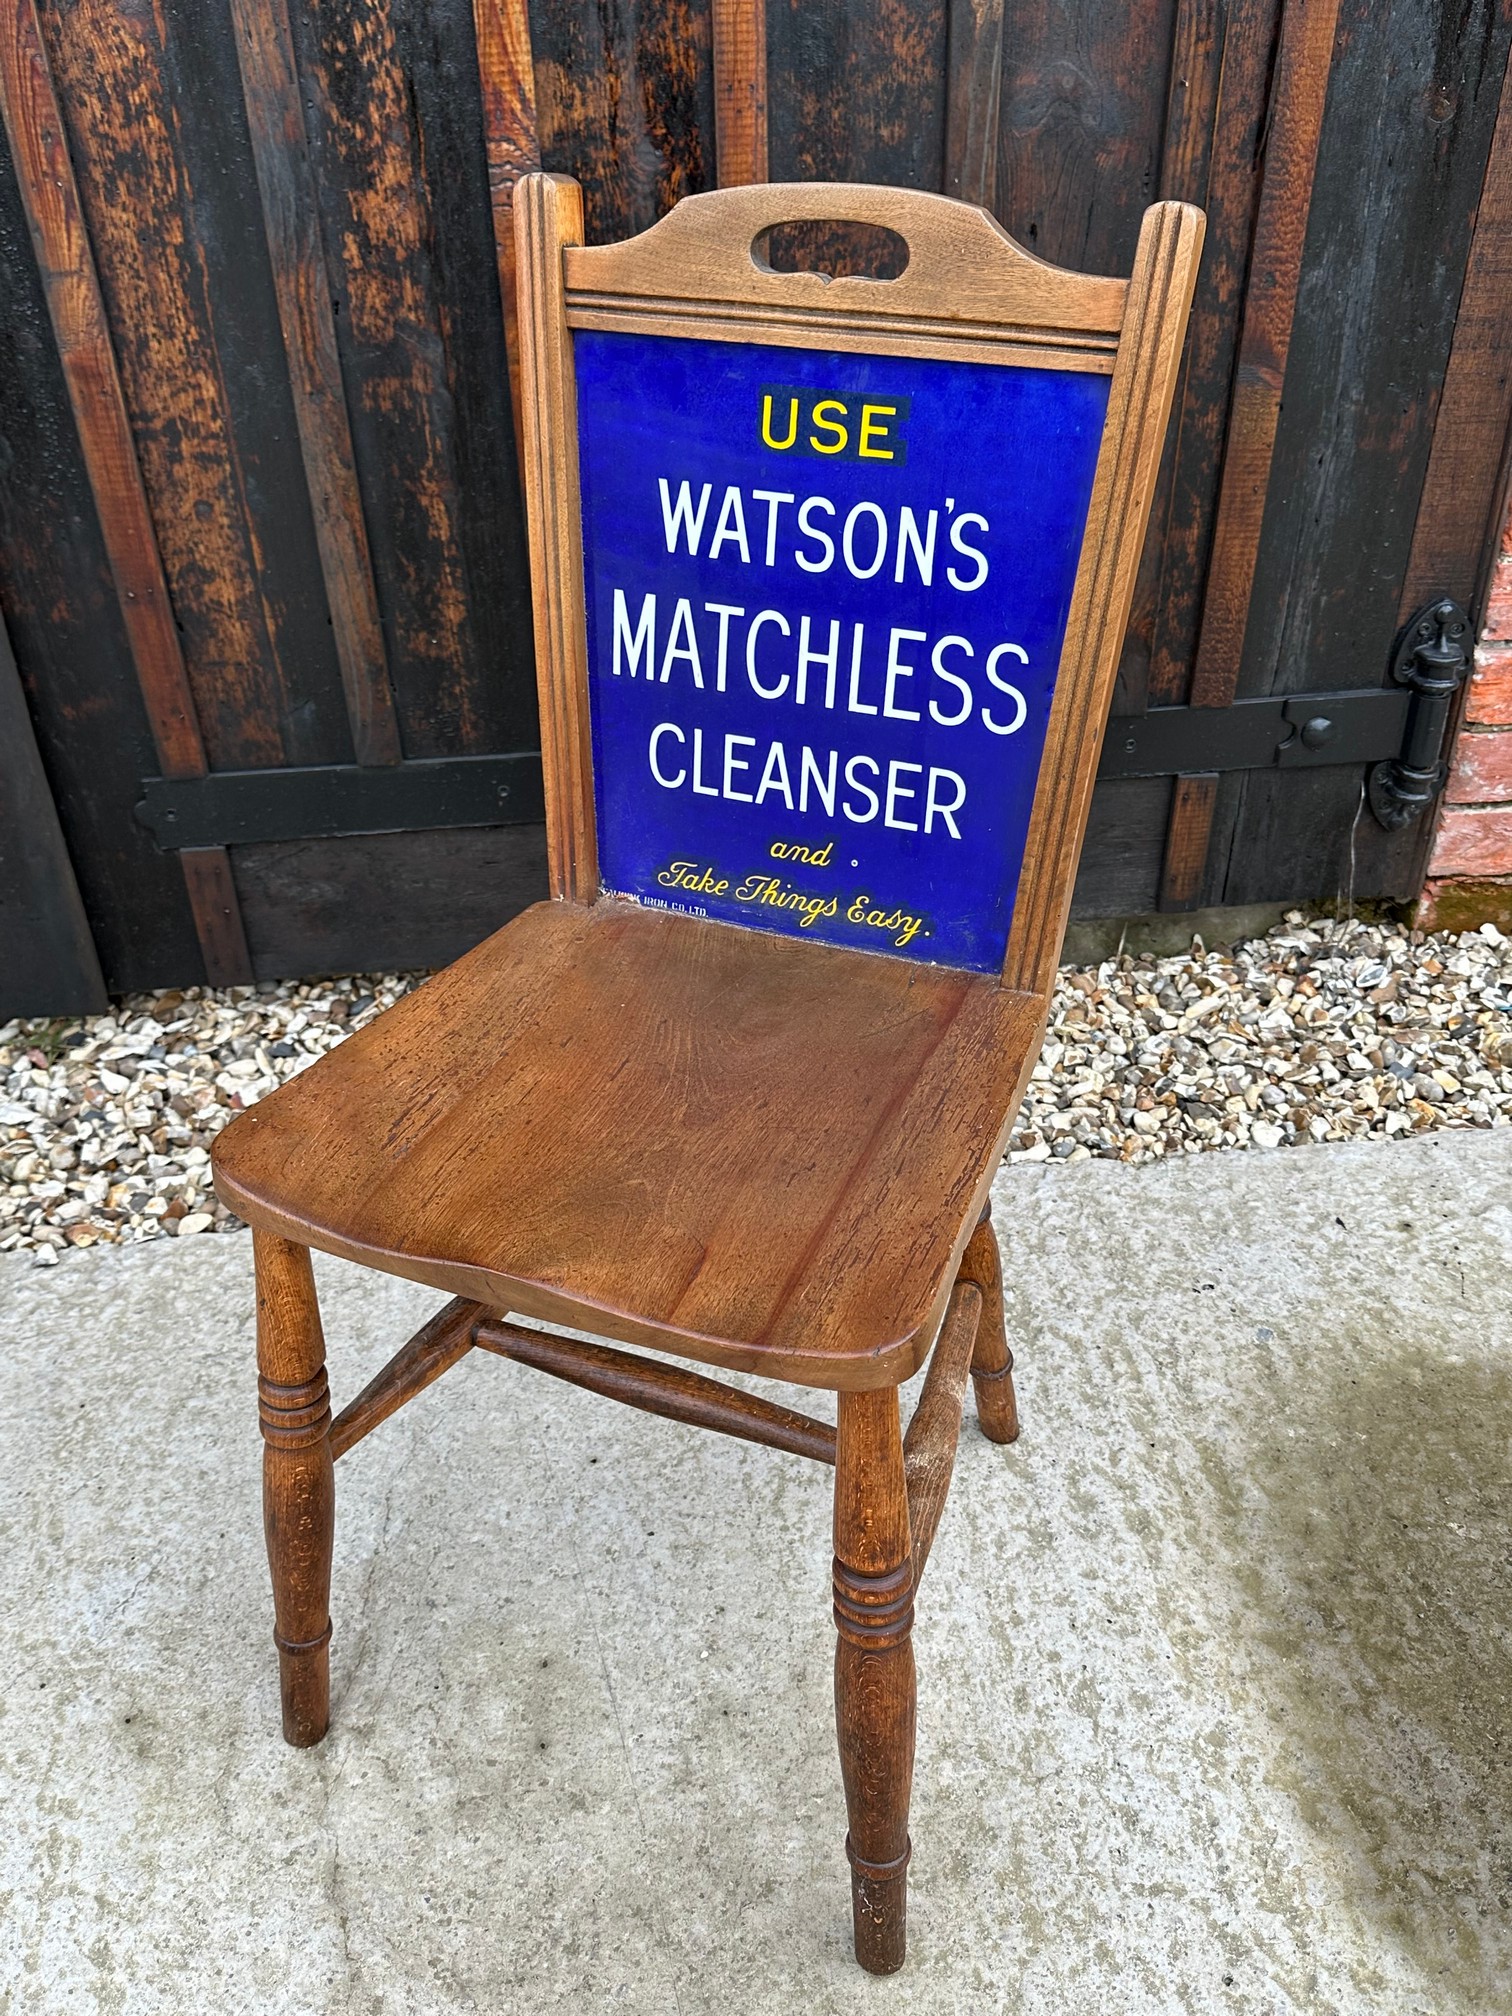 A Watson's Matchless Cleanser enamelled back advertising chair by Falkirk Iron Co. Ltd with